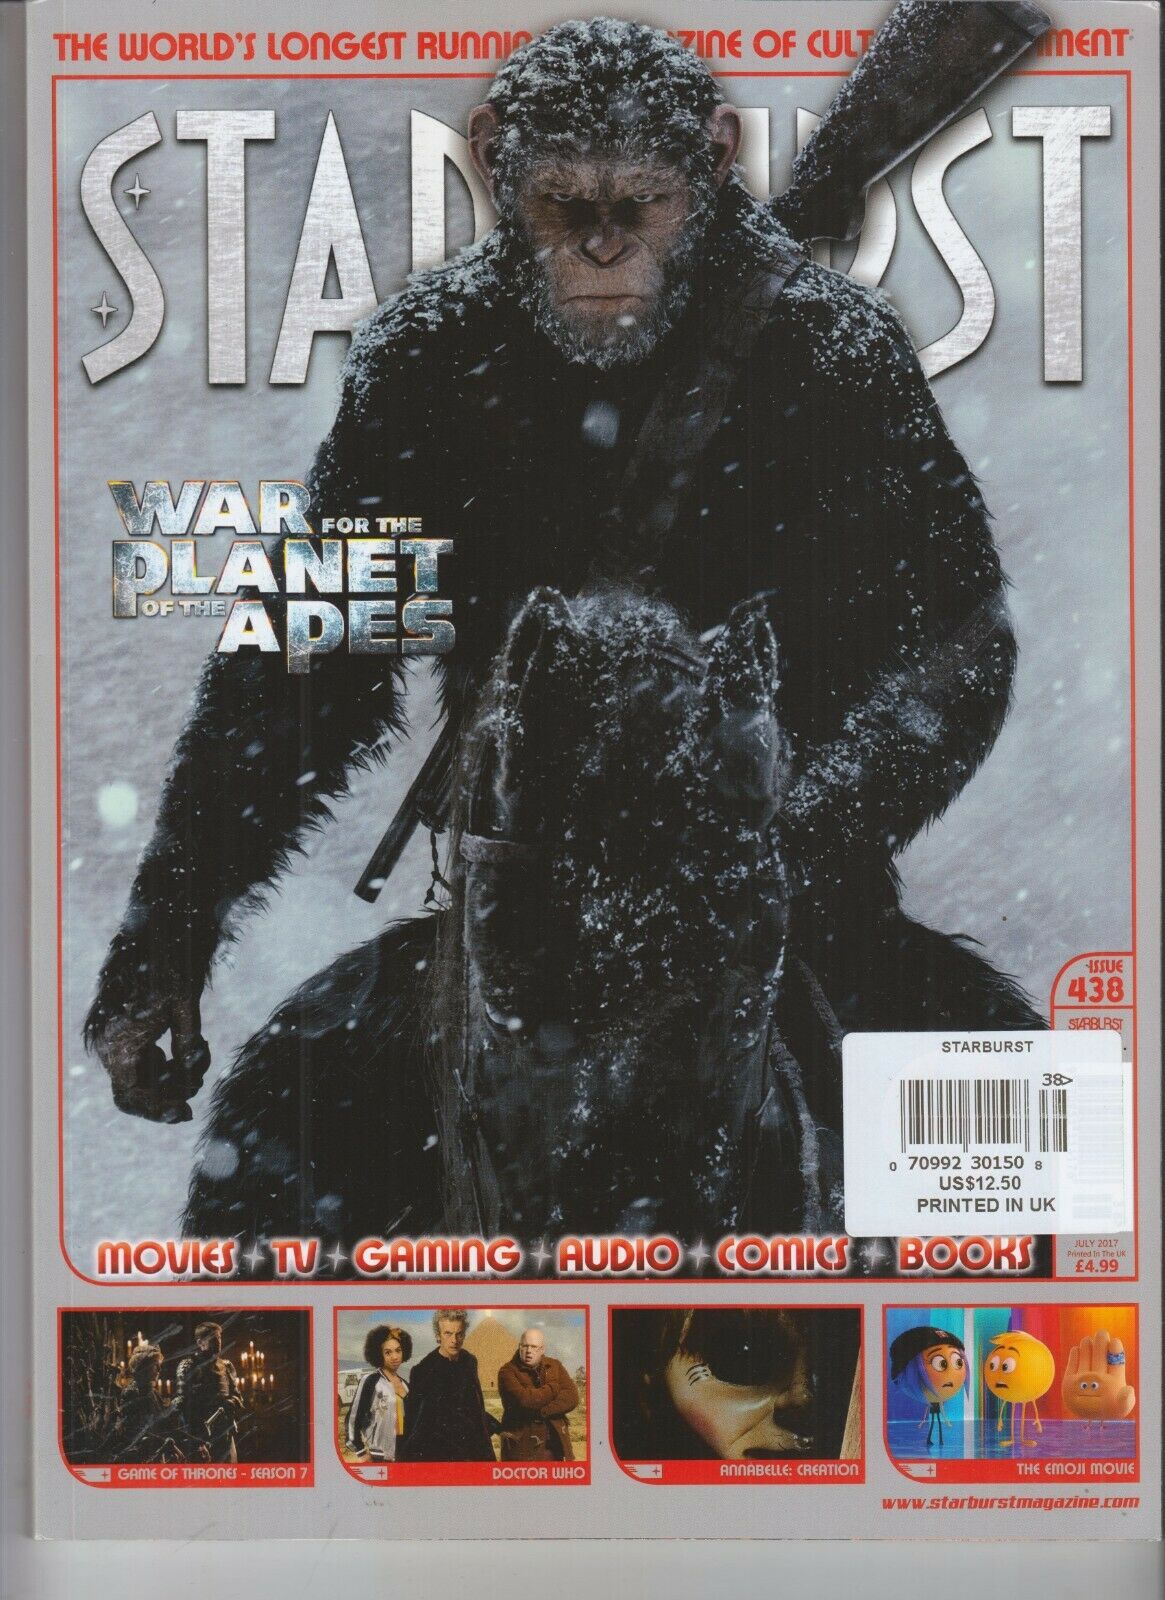 War For The Planet Of The Apes Starburst Magazine July 2017 Issue #438